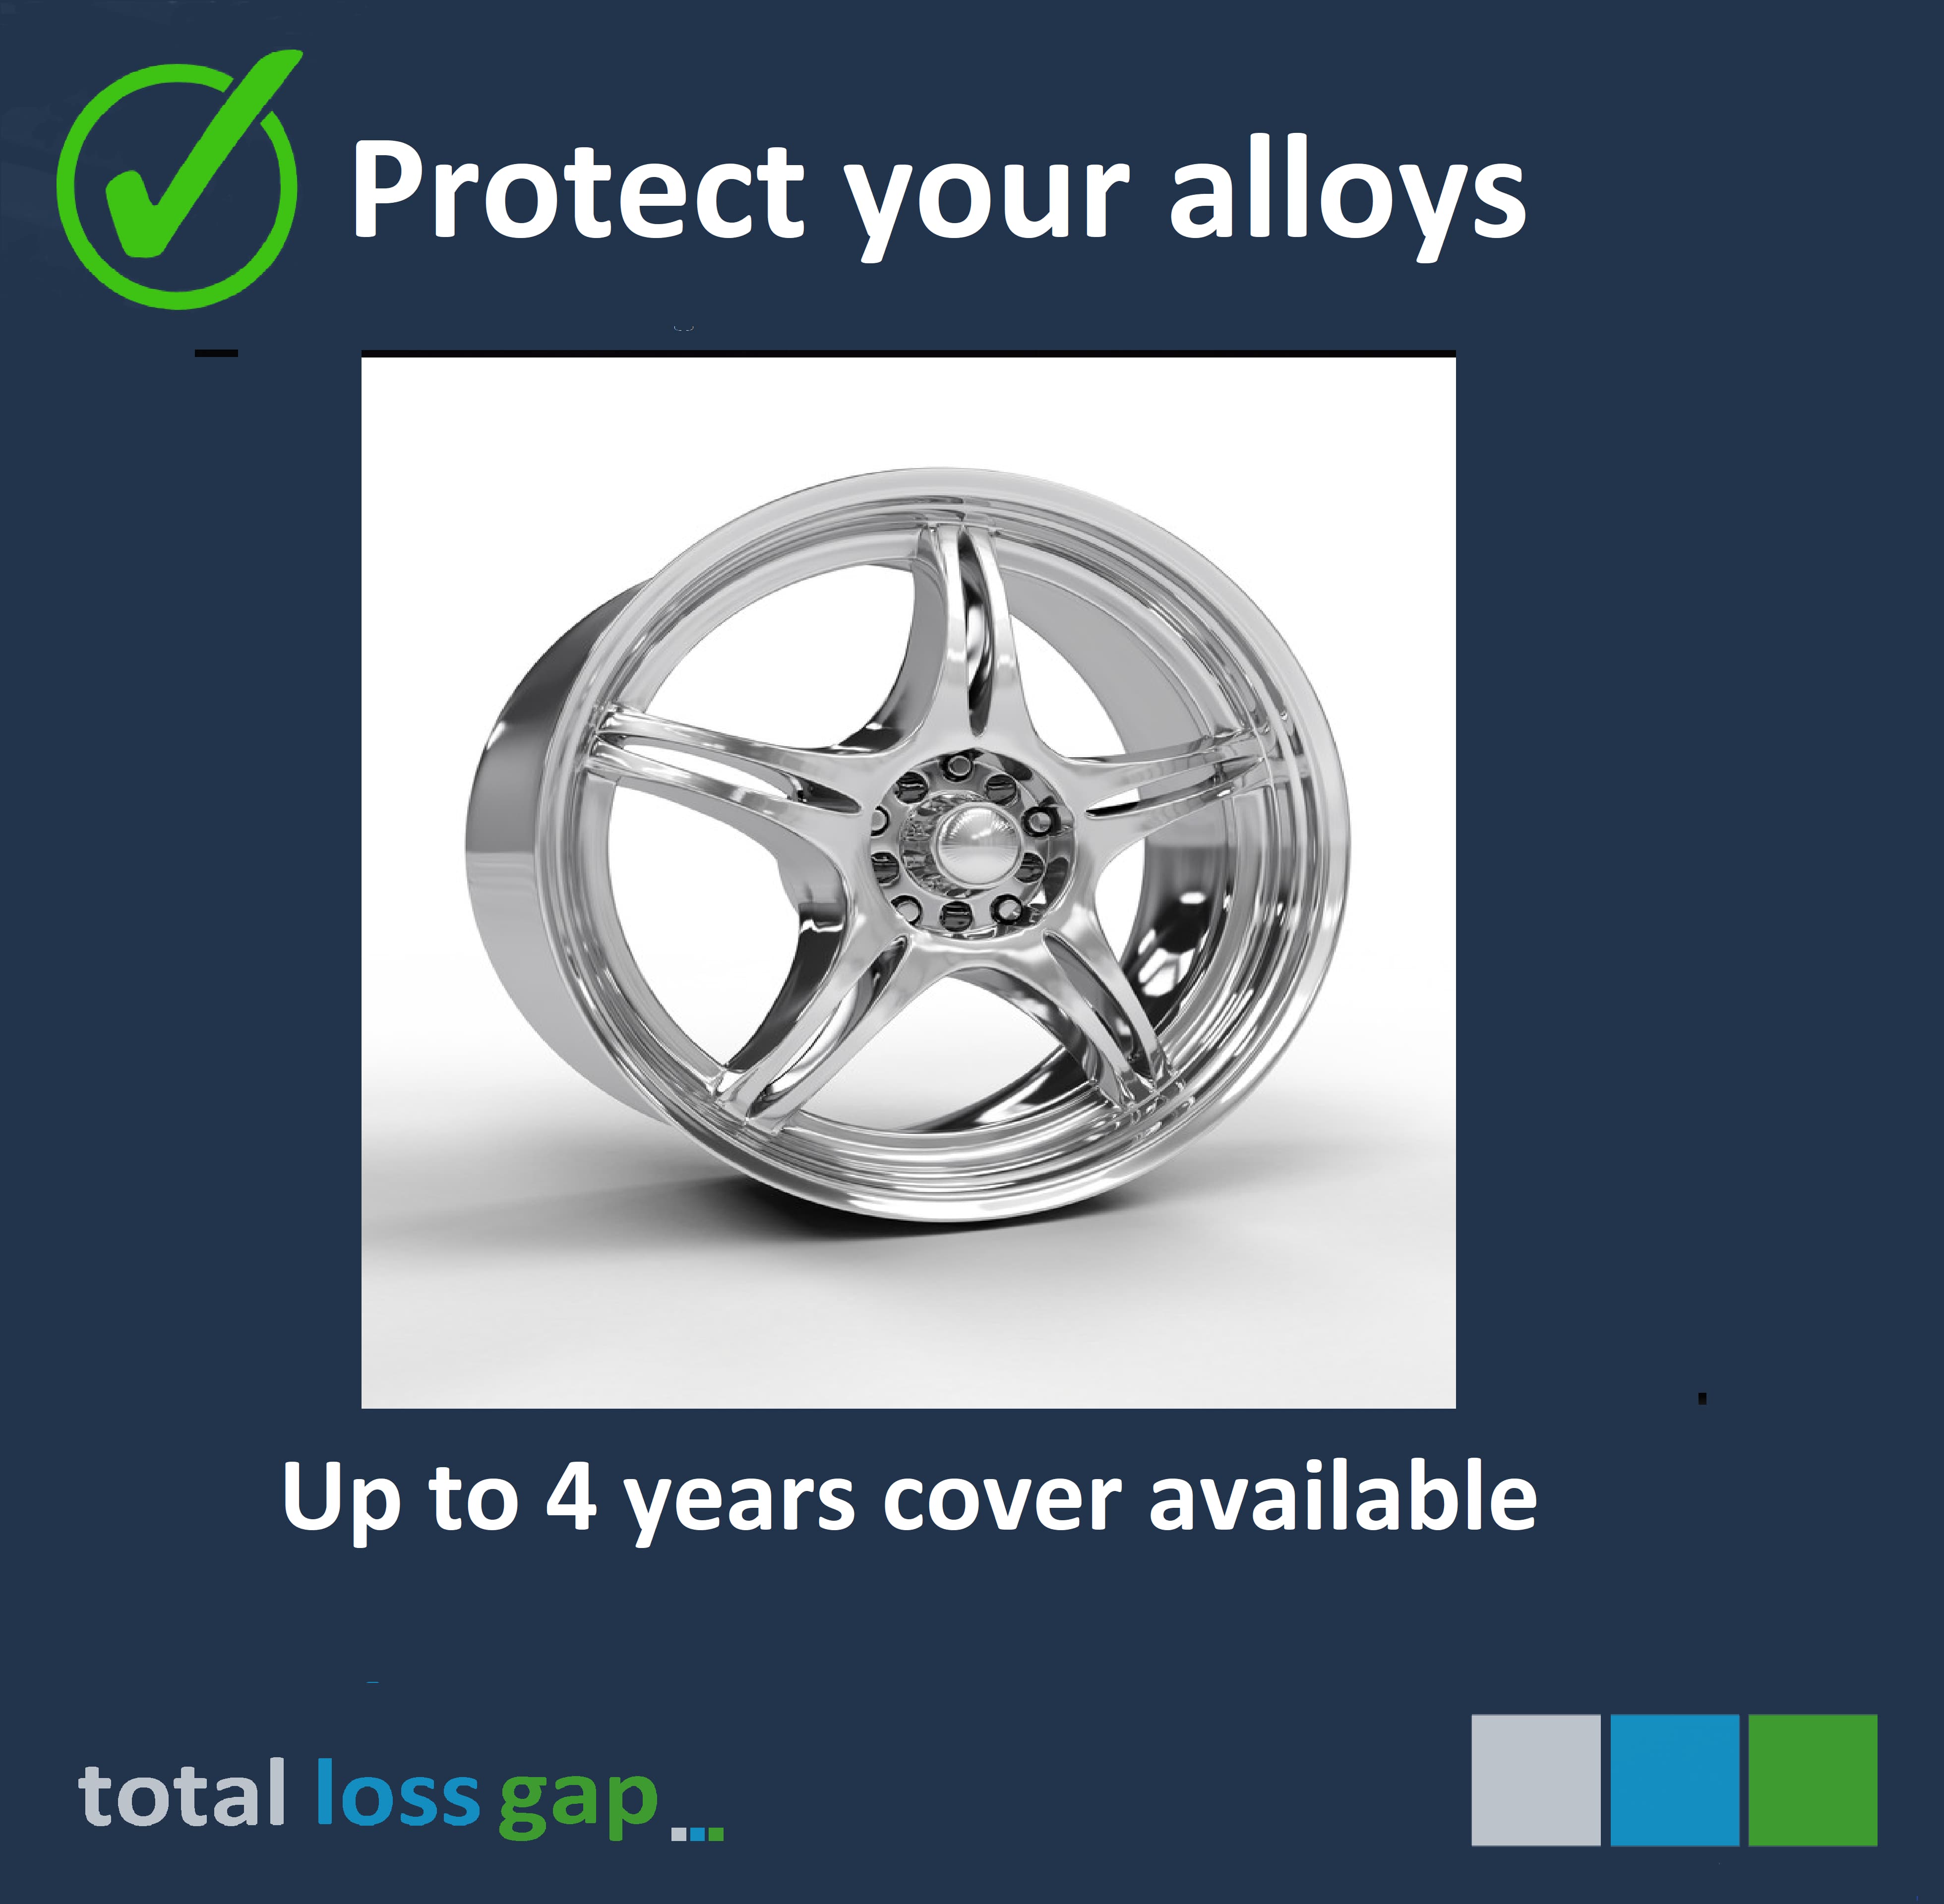 You can buy up to 4 years alloy wheel insurance